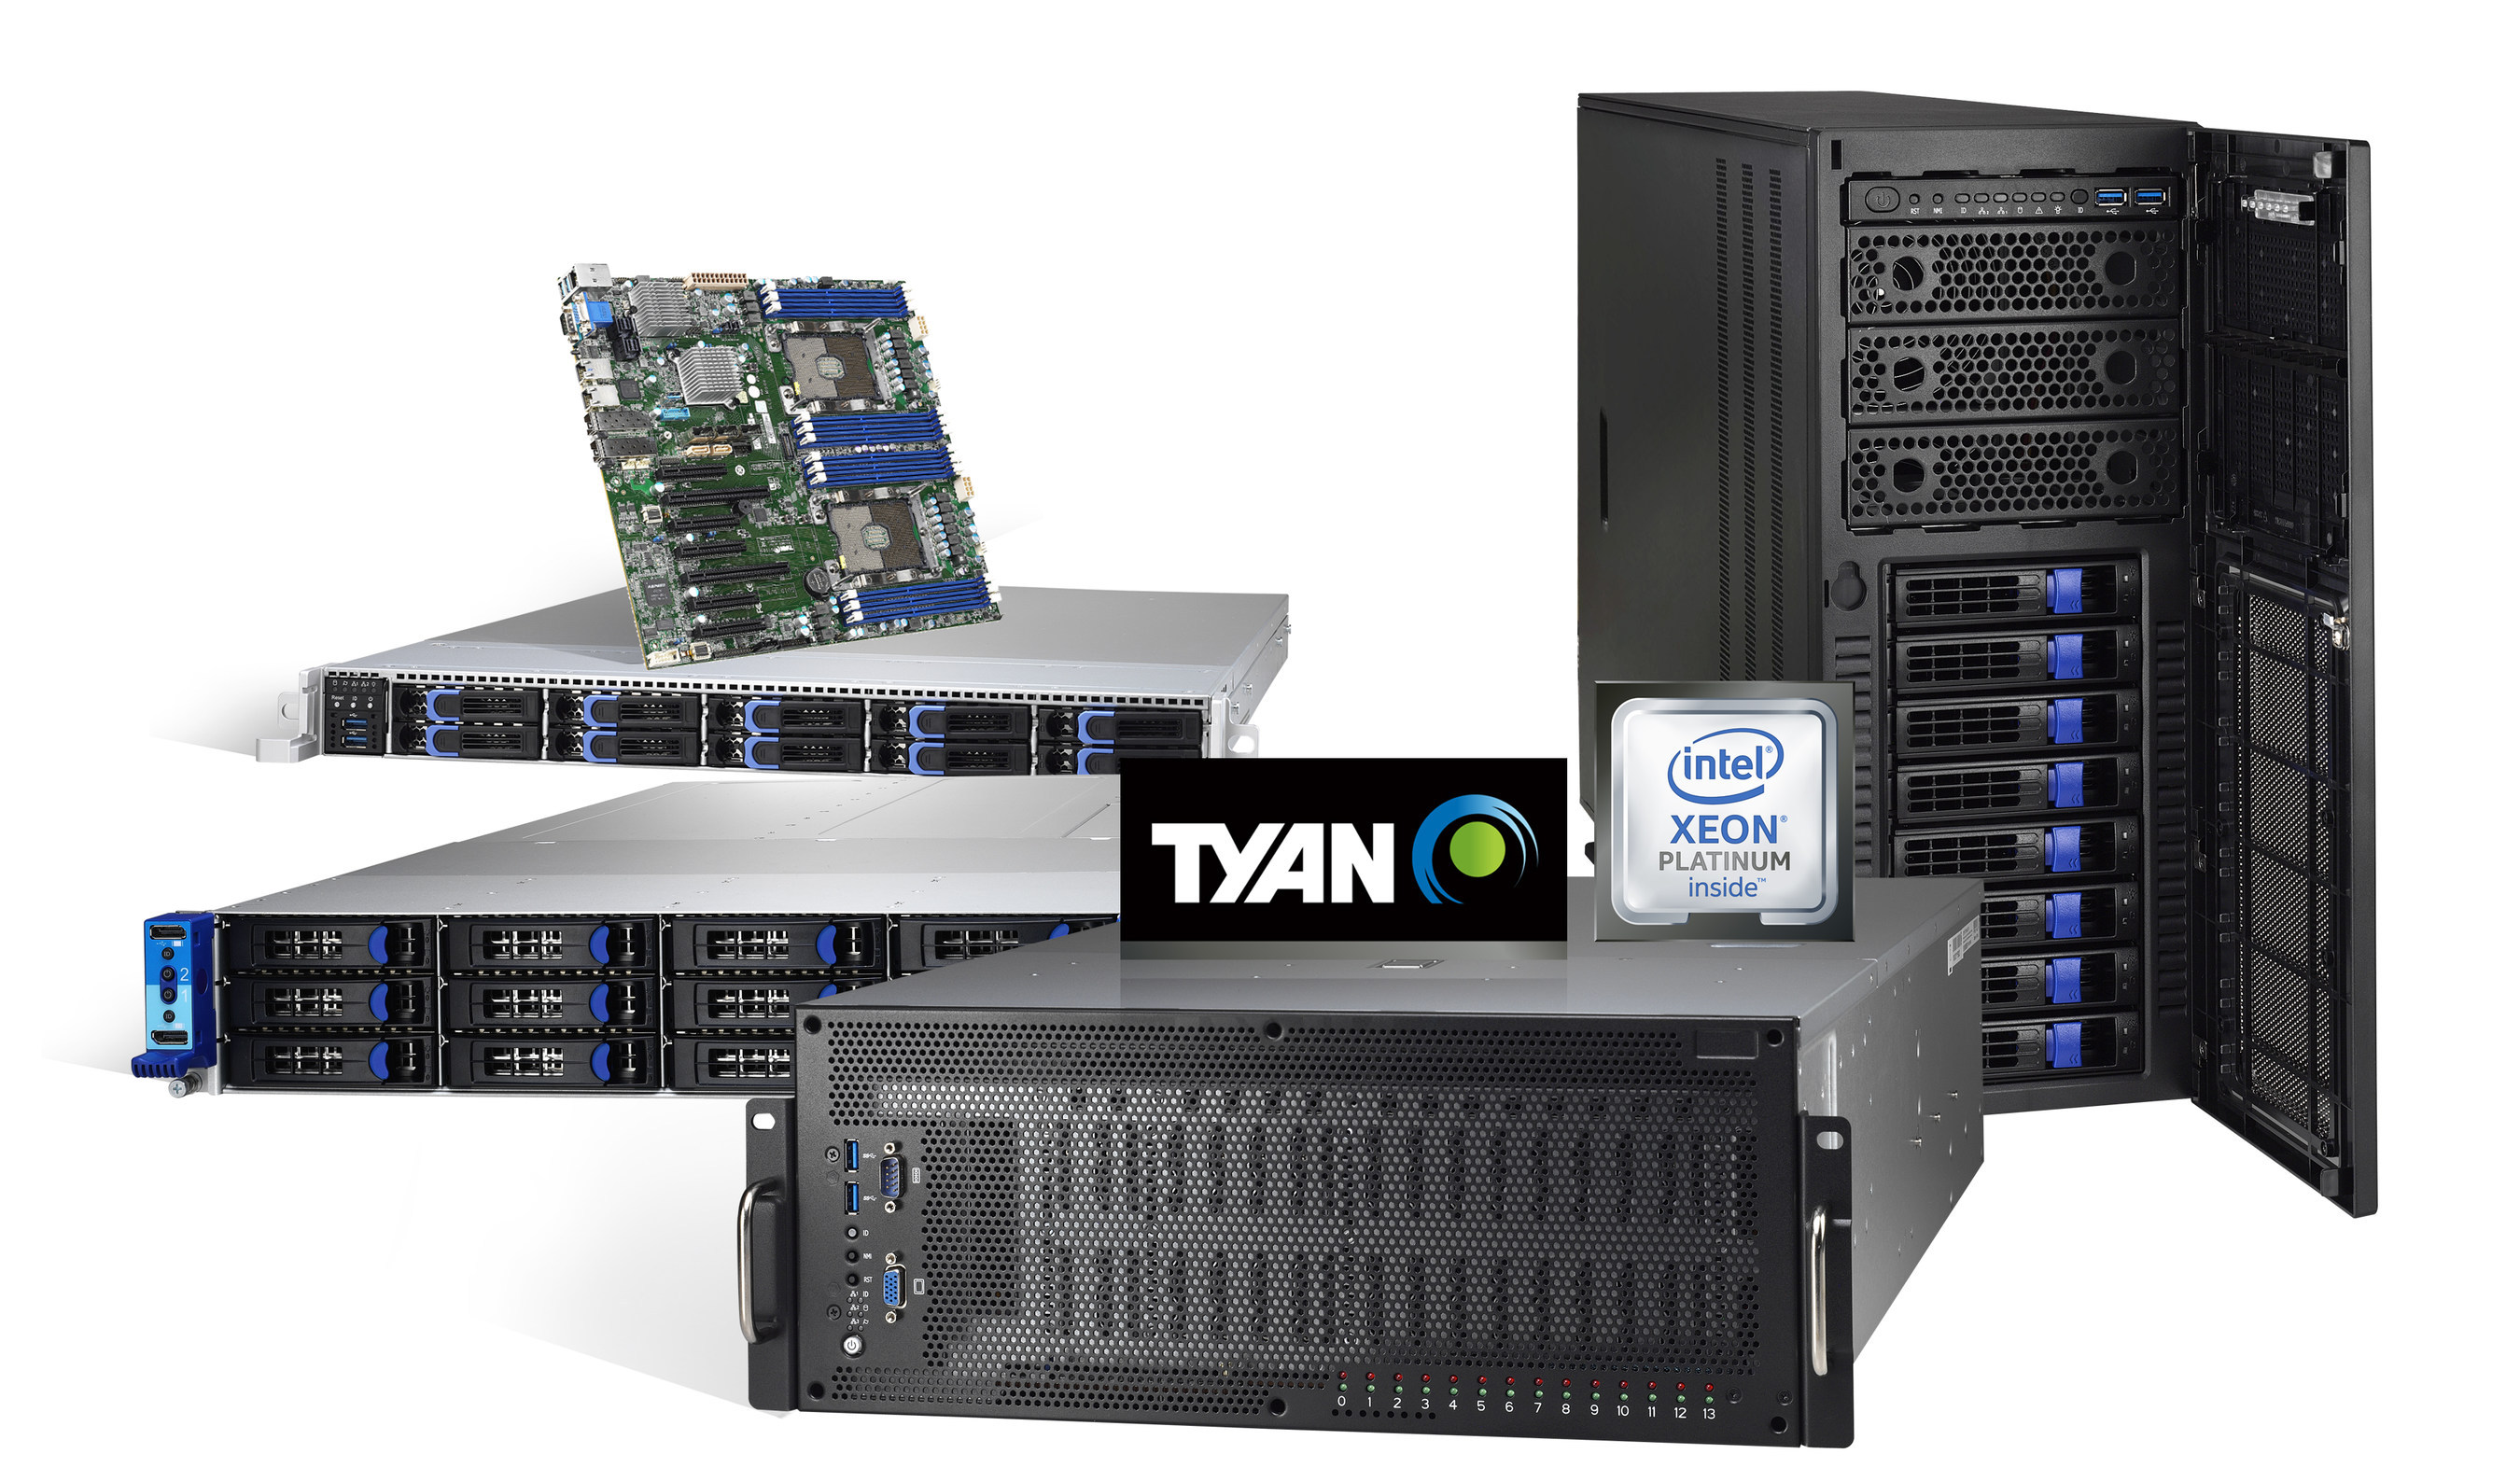 TYAN has added support for 2nd generation Intel Xeon Scalable processors and Optane DC persistent memory 